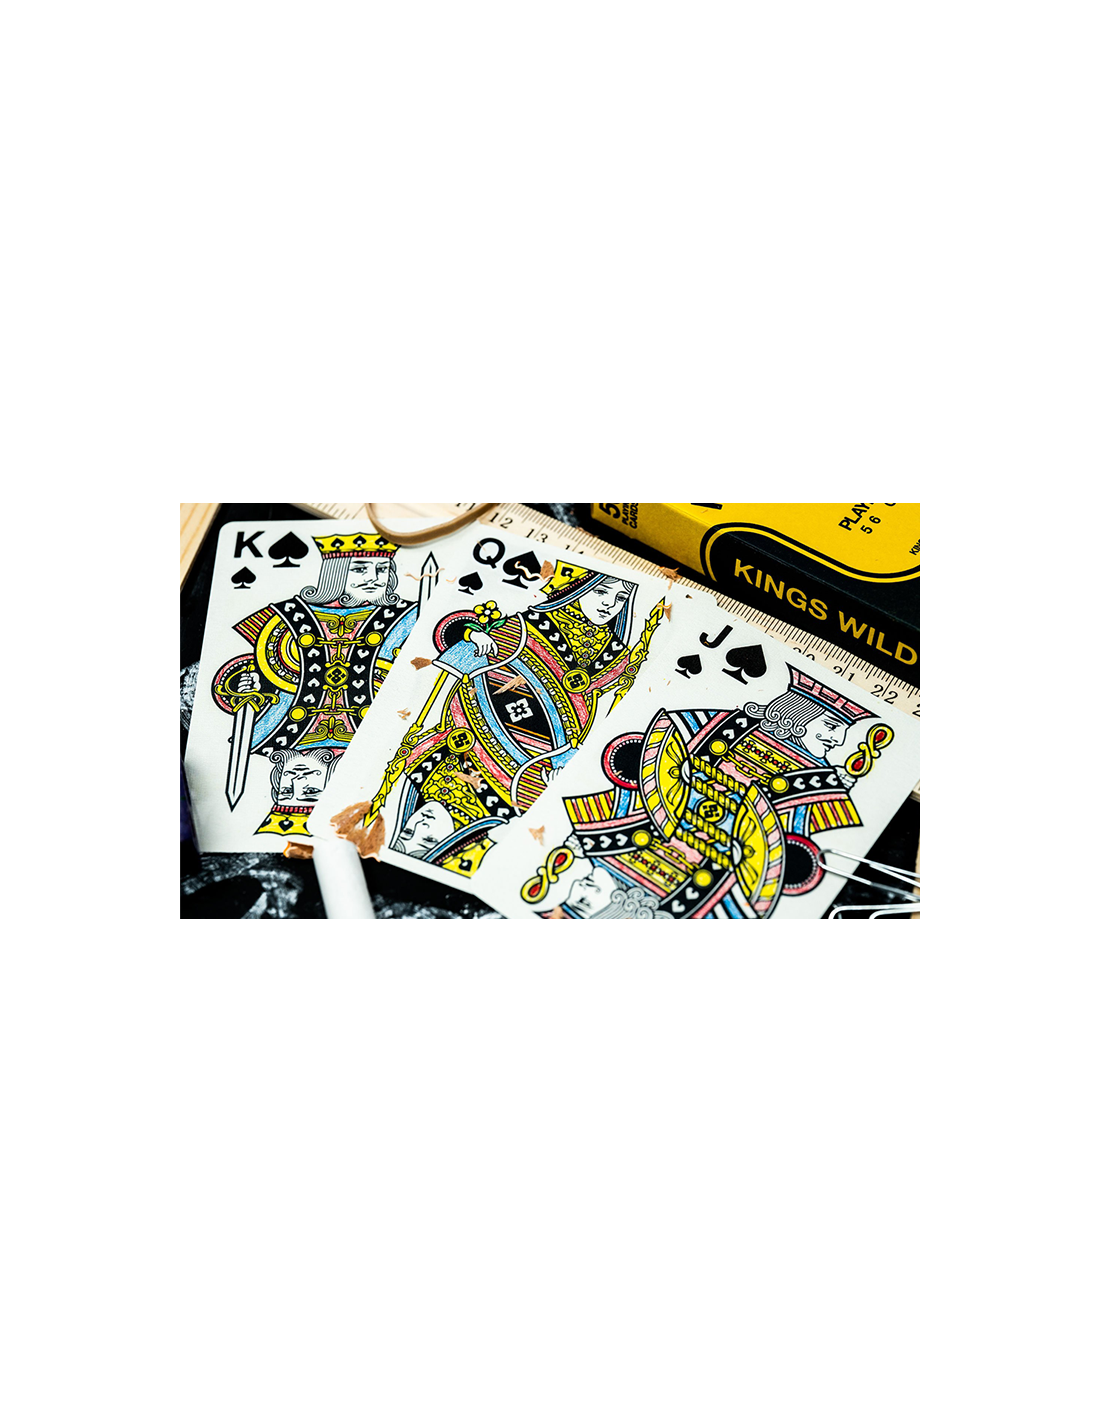 Back To School Playing Cards Deck by Kings Wild Project Inc Brand New 